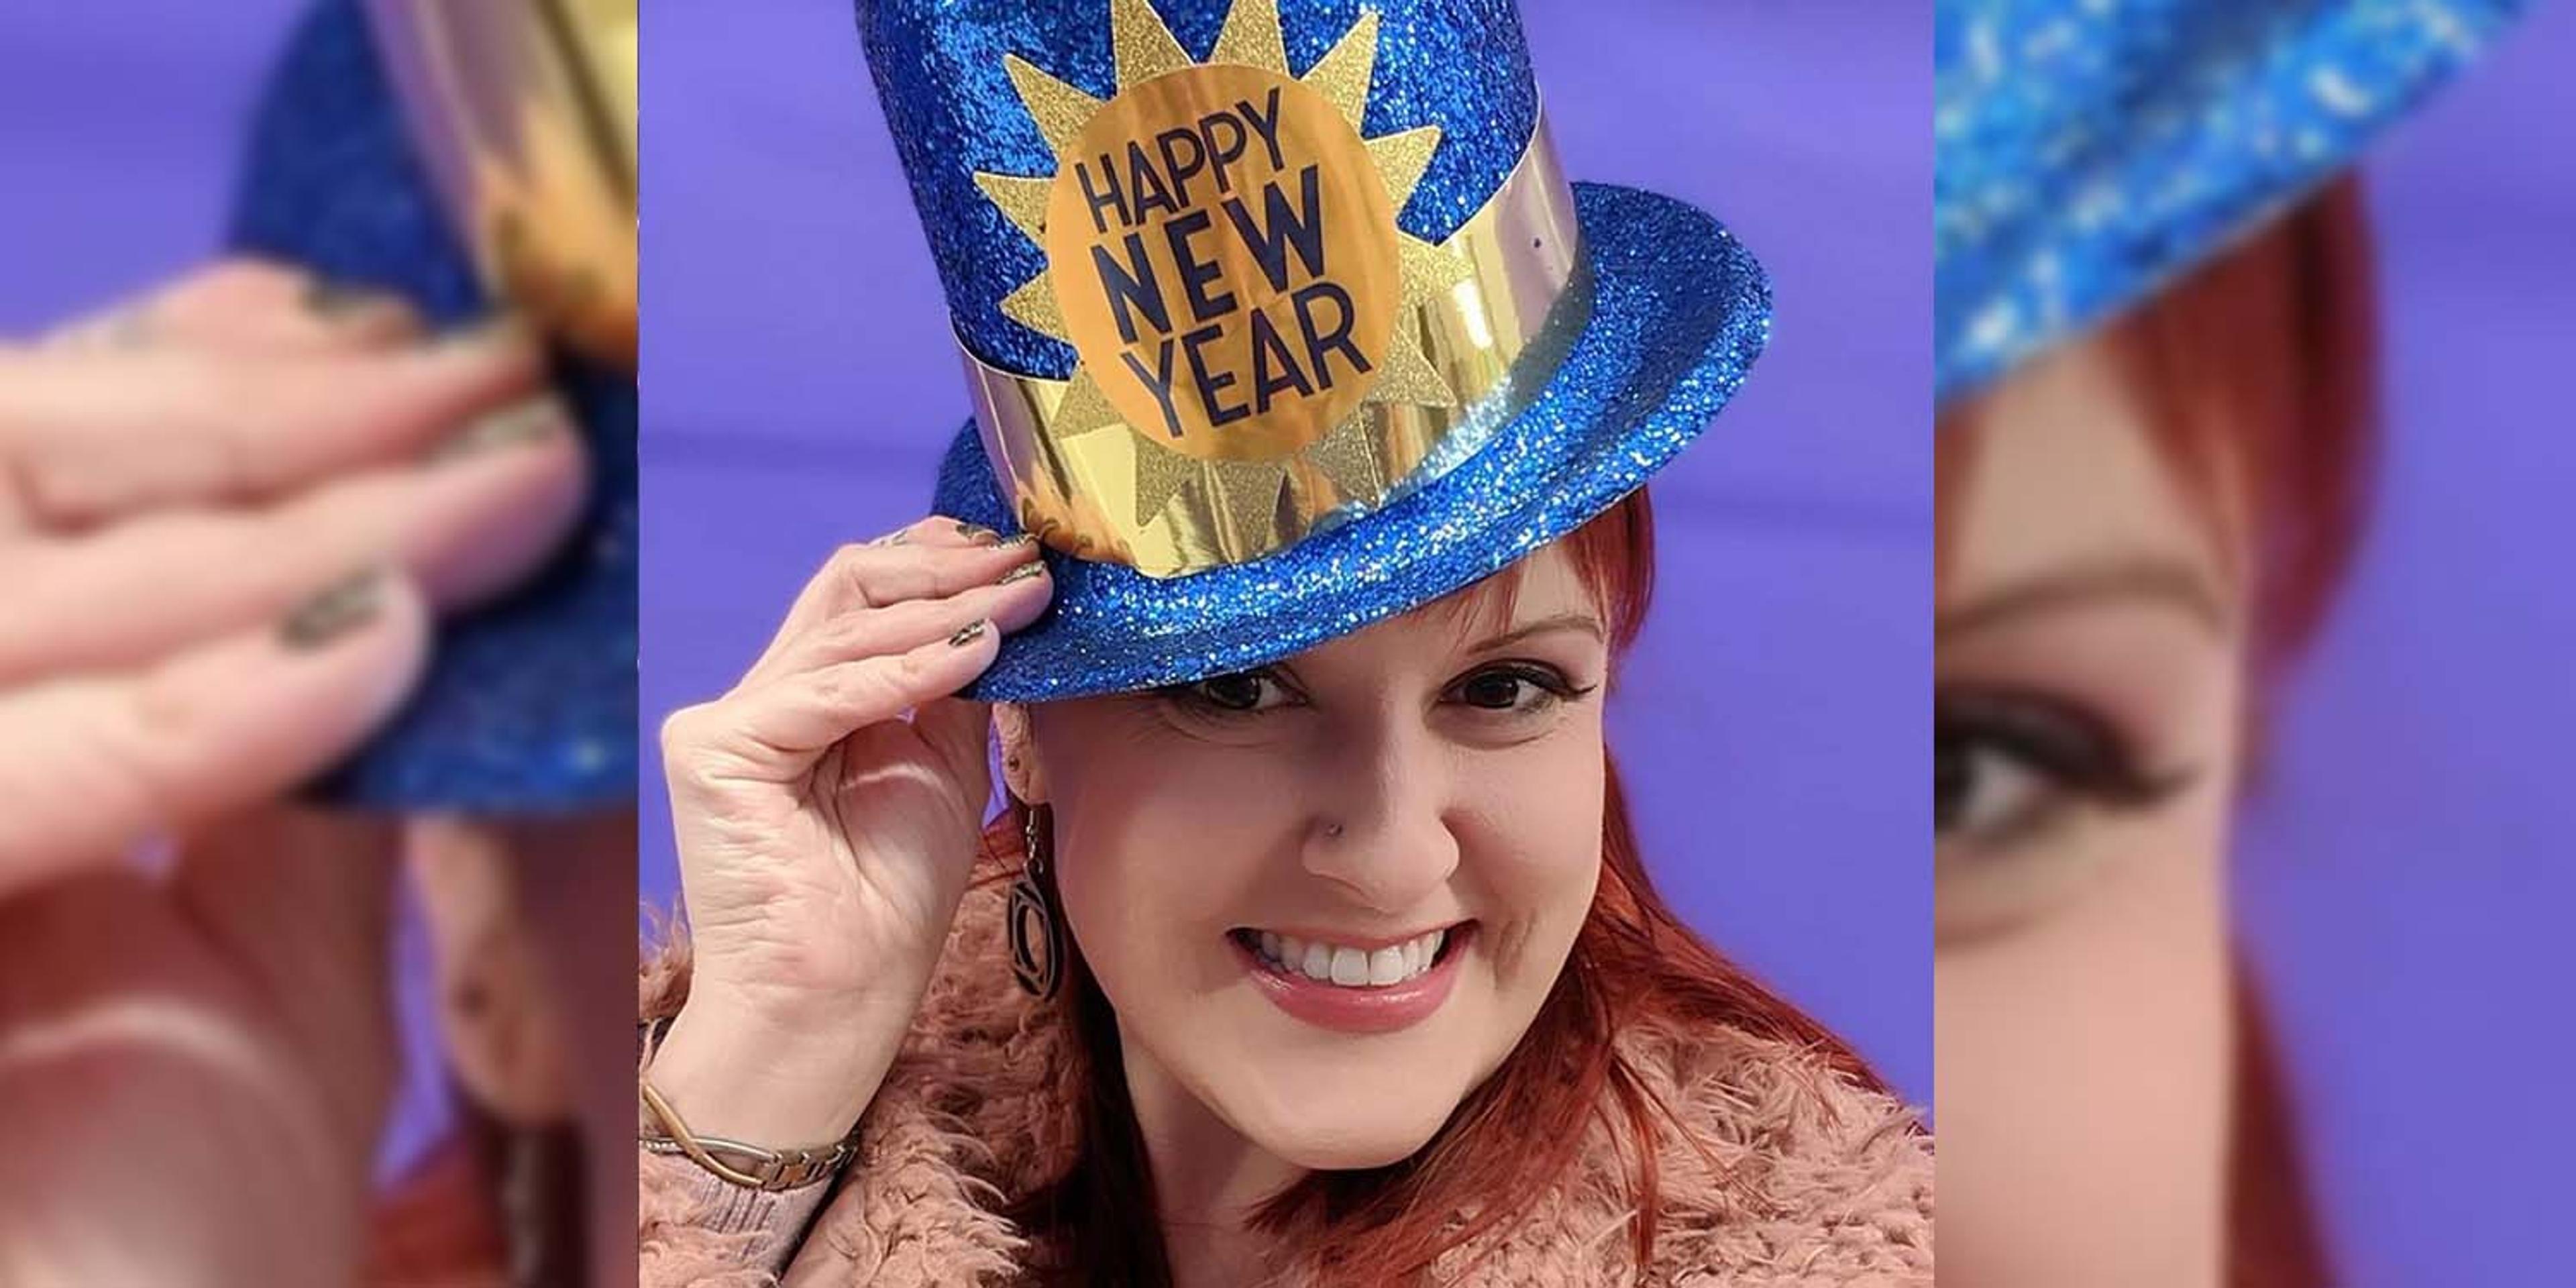 Monica Drake poses for a photo wearing a Happy New Year hat